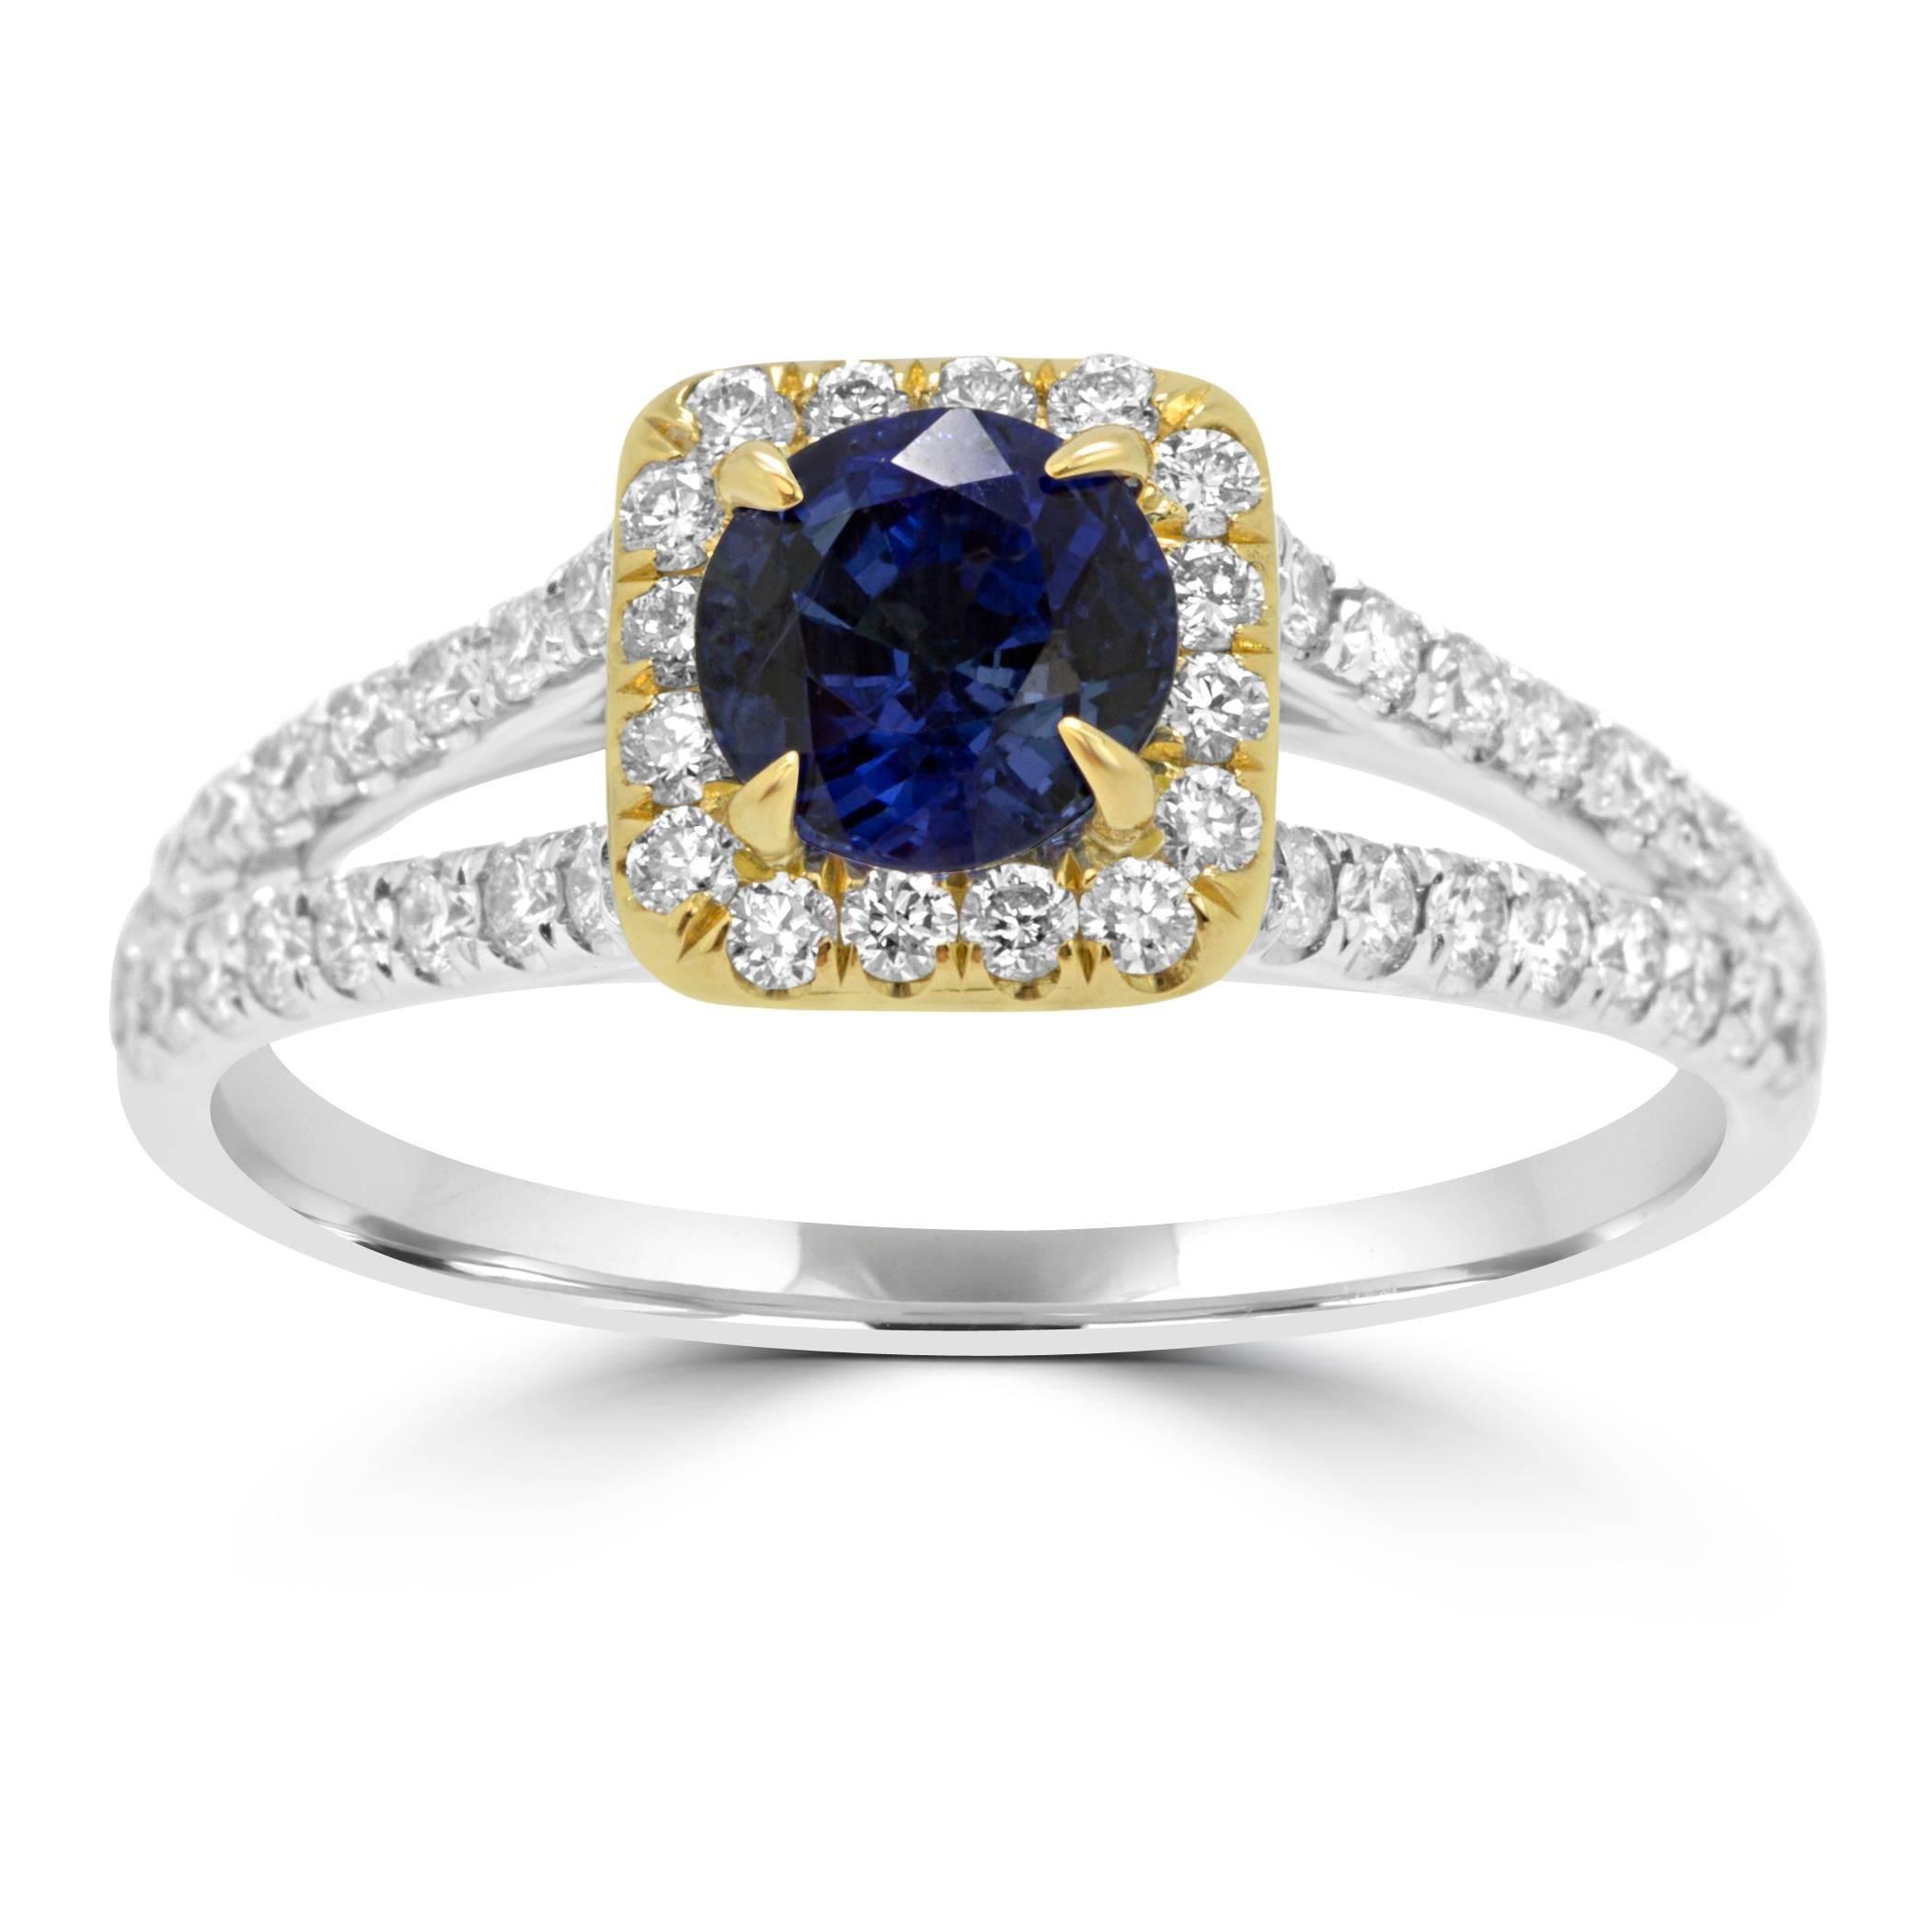 Blue Sapphire Round 0.63 Carat Encircled in a Single Halo of White Round Diamonds 0.45 Carat in always in style classic split shank Bridal or Fashion 18k White and Yellow Gold Ring.

Style available in different price ranges. Prices are based on